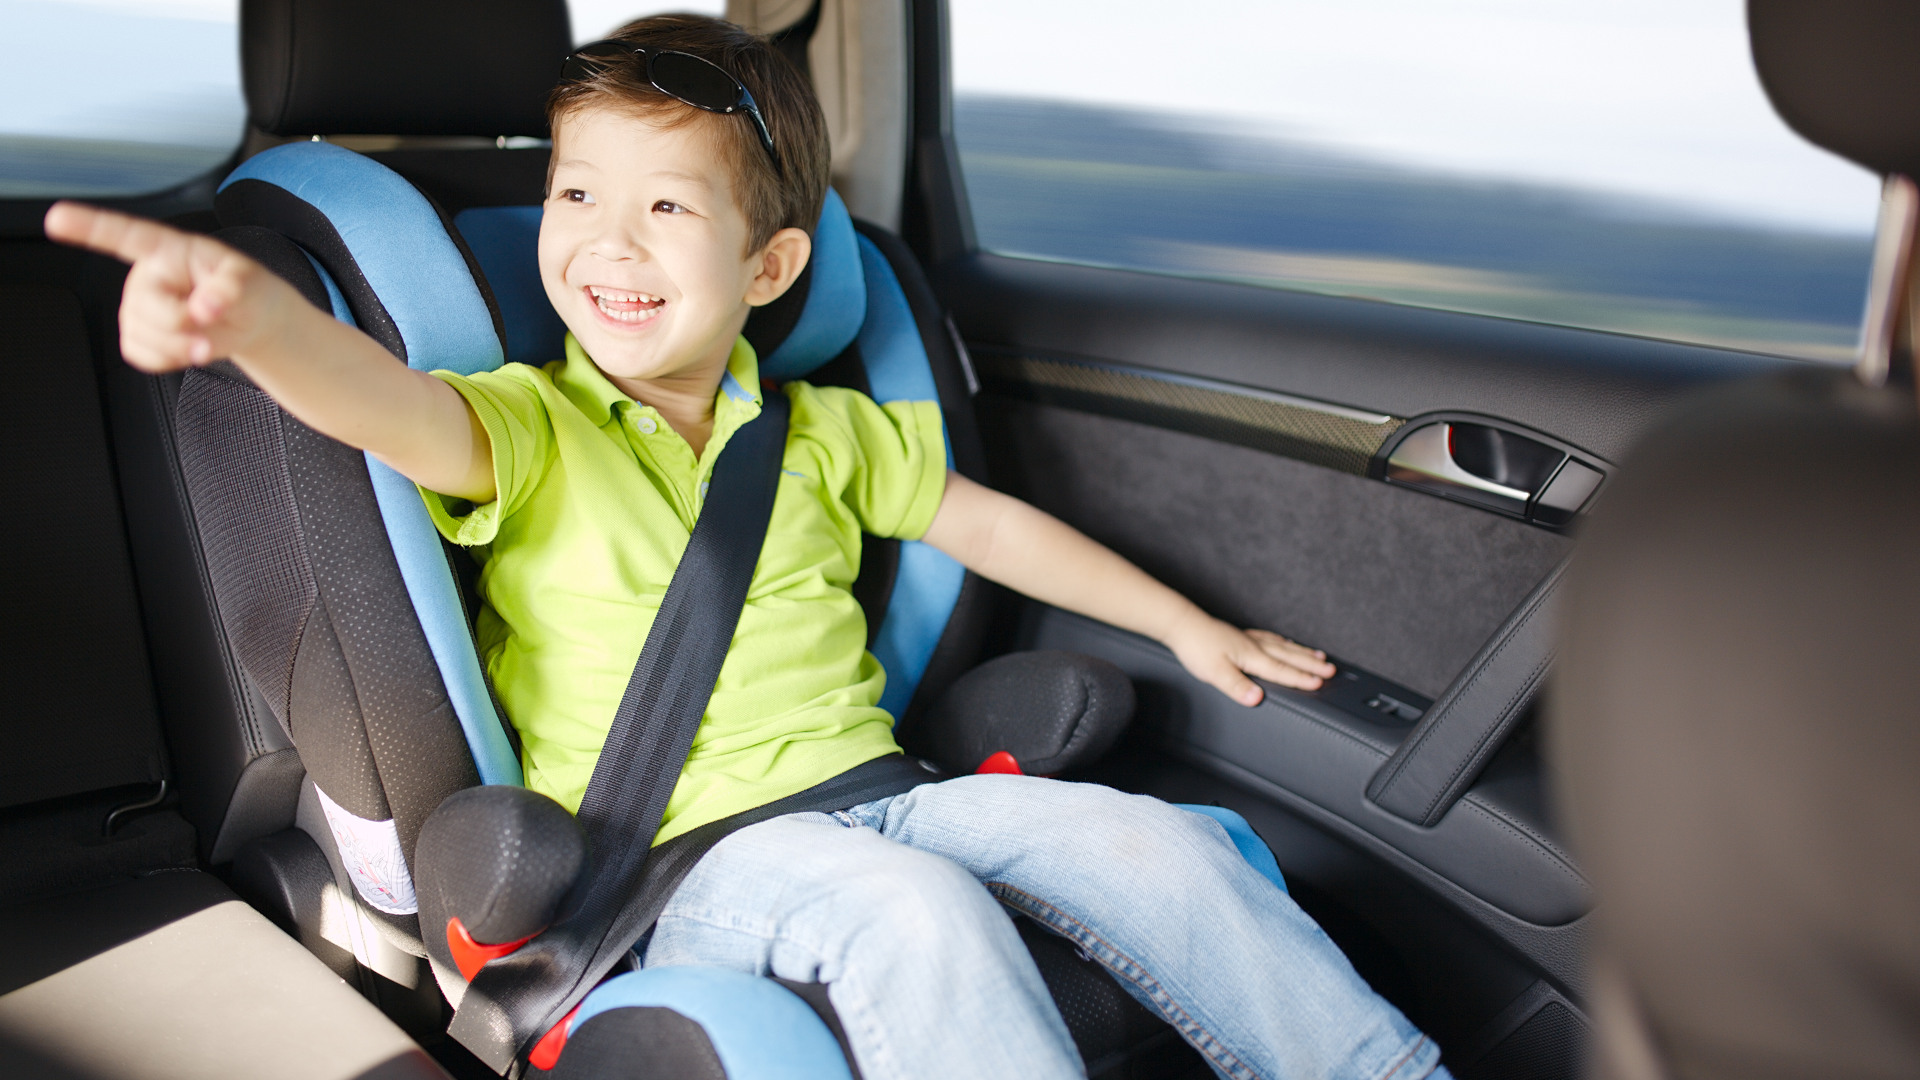 Why A 4 11 Child Needs Booster Seat, What Are The Requirements For Child Car Seats